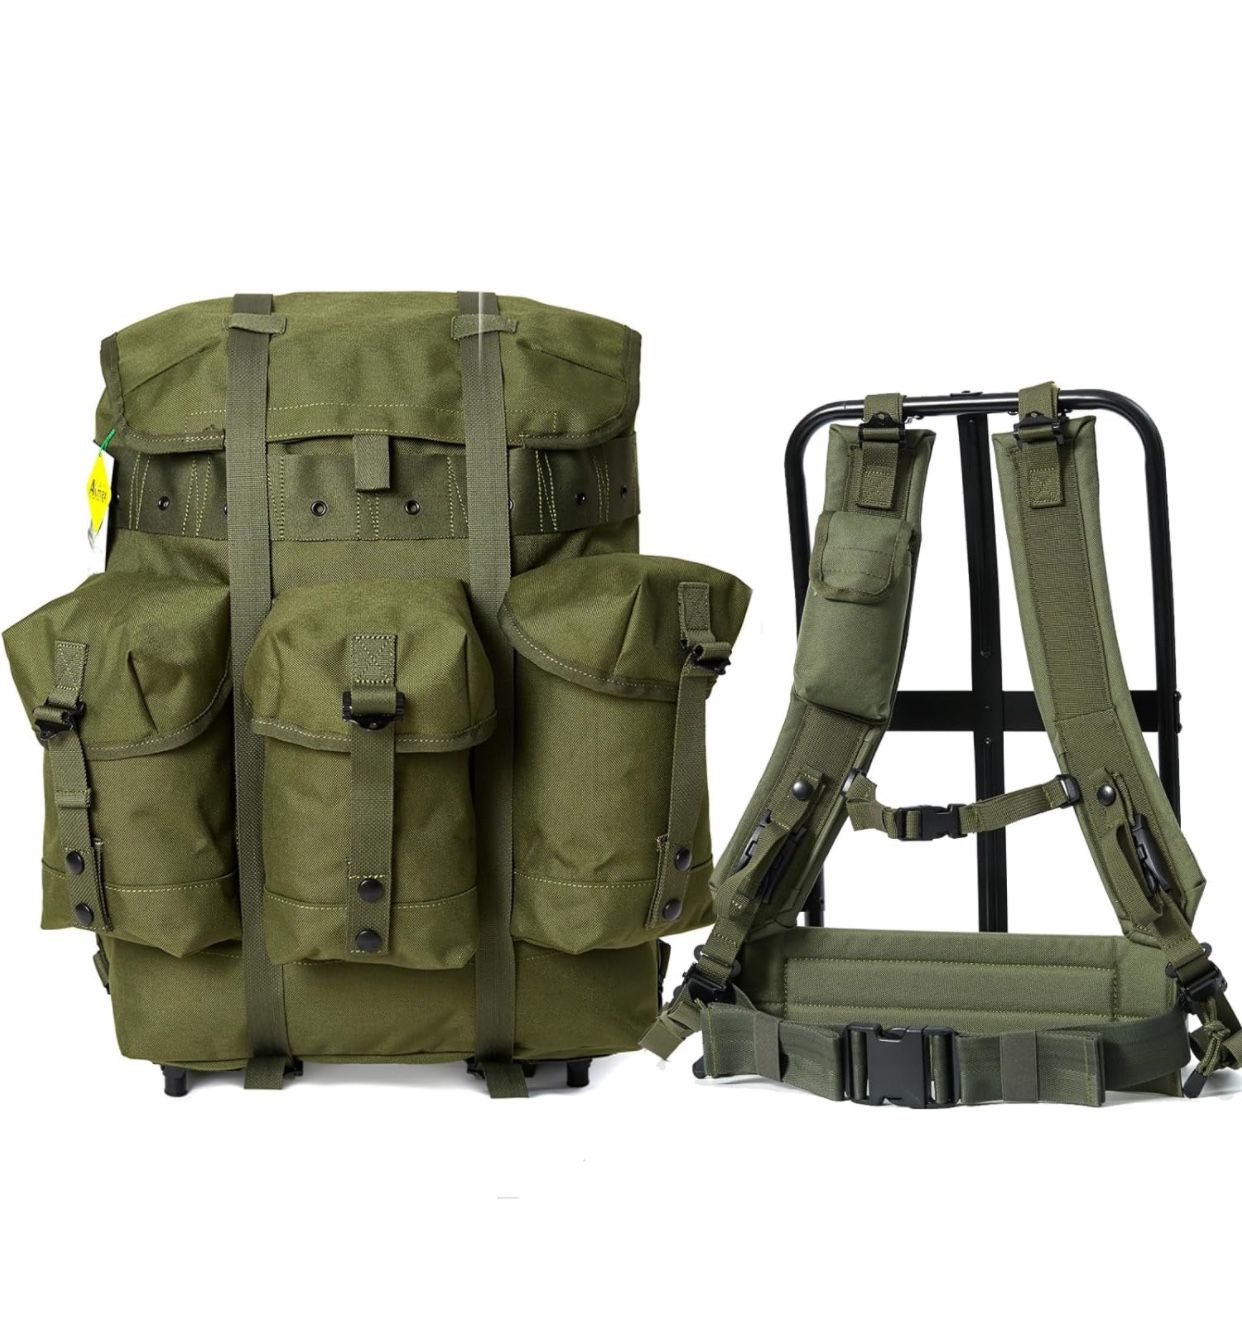 MT Military Large Alice Pack Army Survival Combat Backpack ALICE Rucksack Olive 